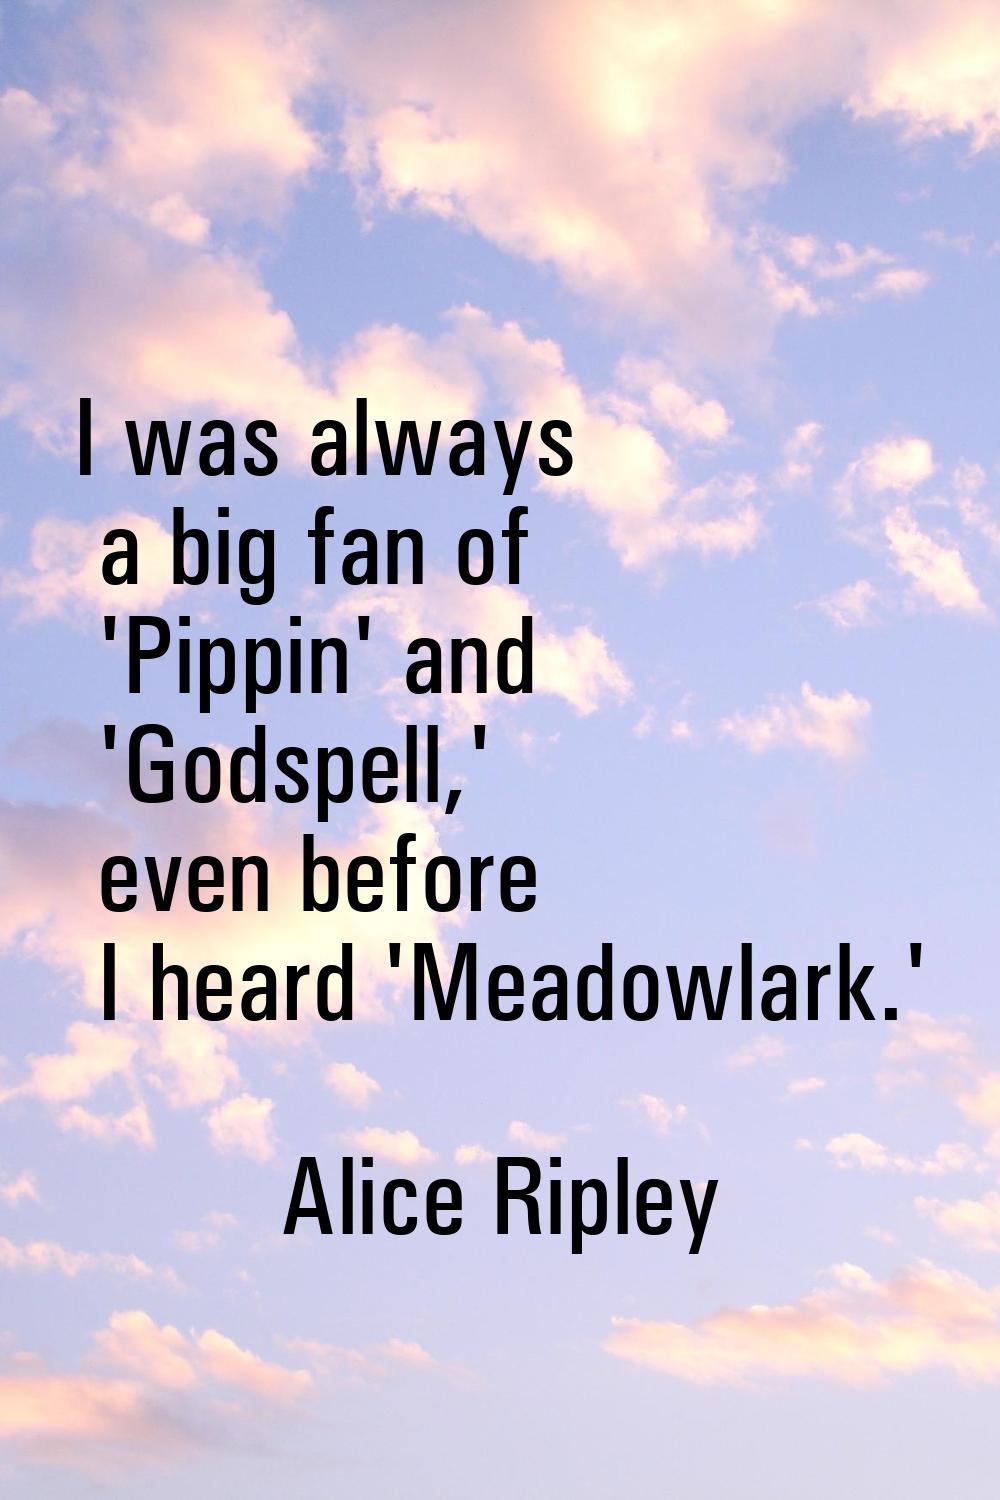 I was always a big fan of 'Pippin' and 'Godspell,' even before I heard 'Meadowlark.'